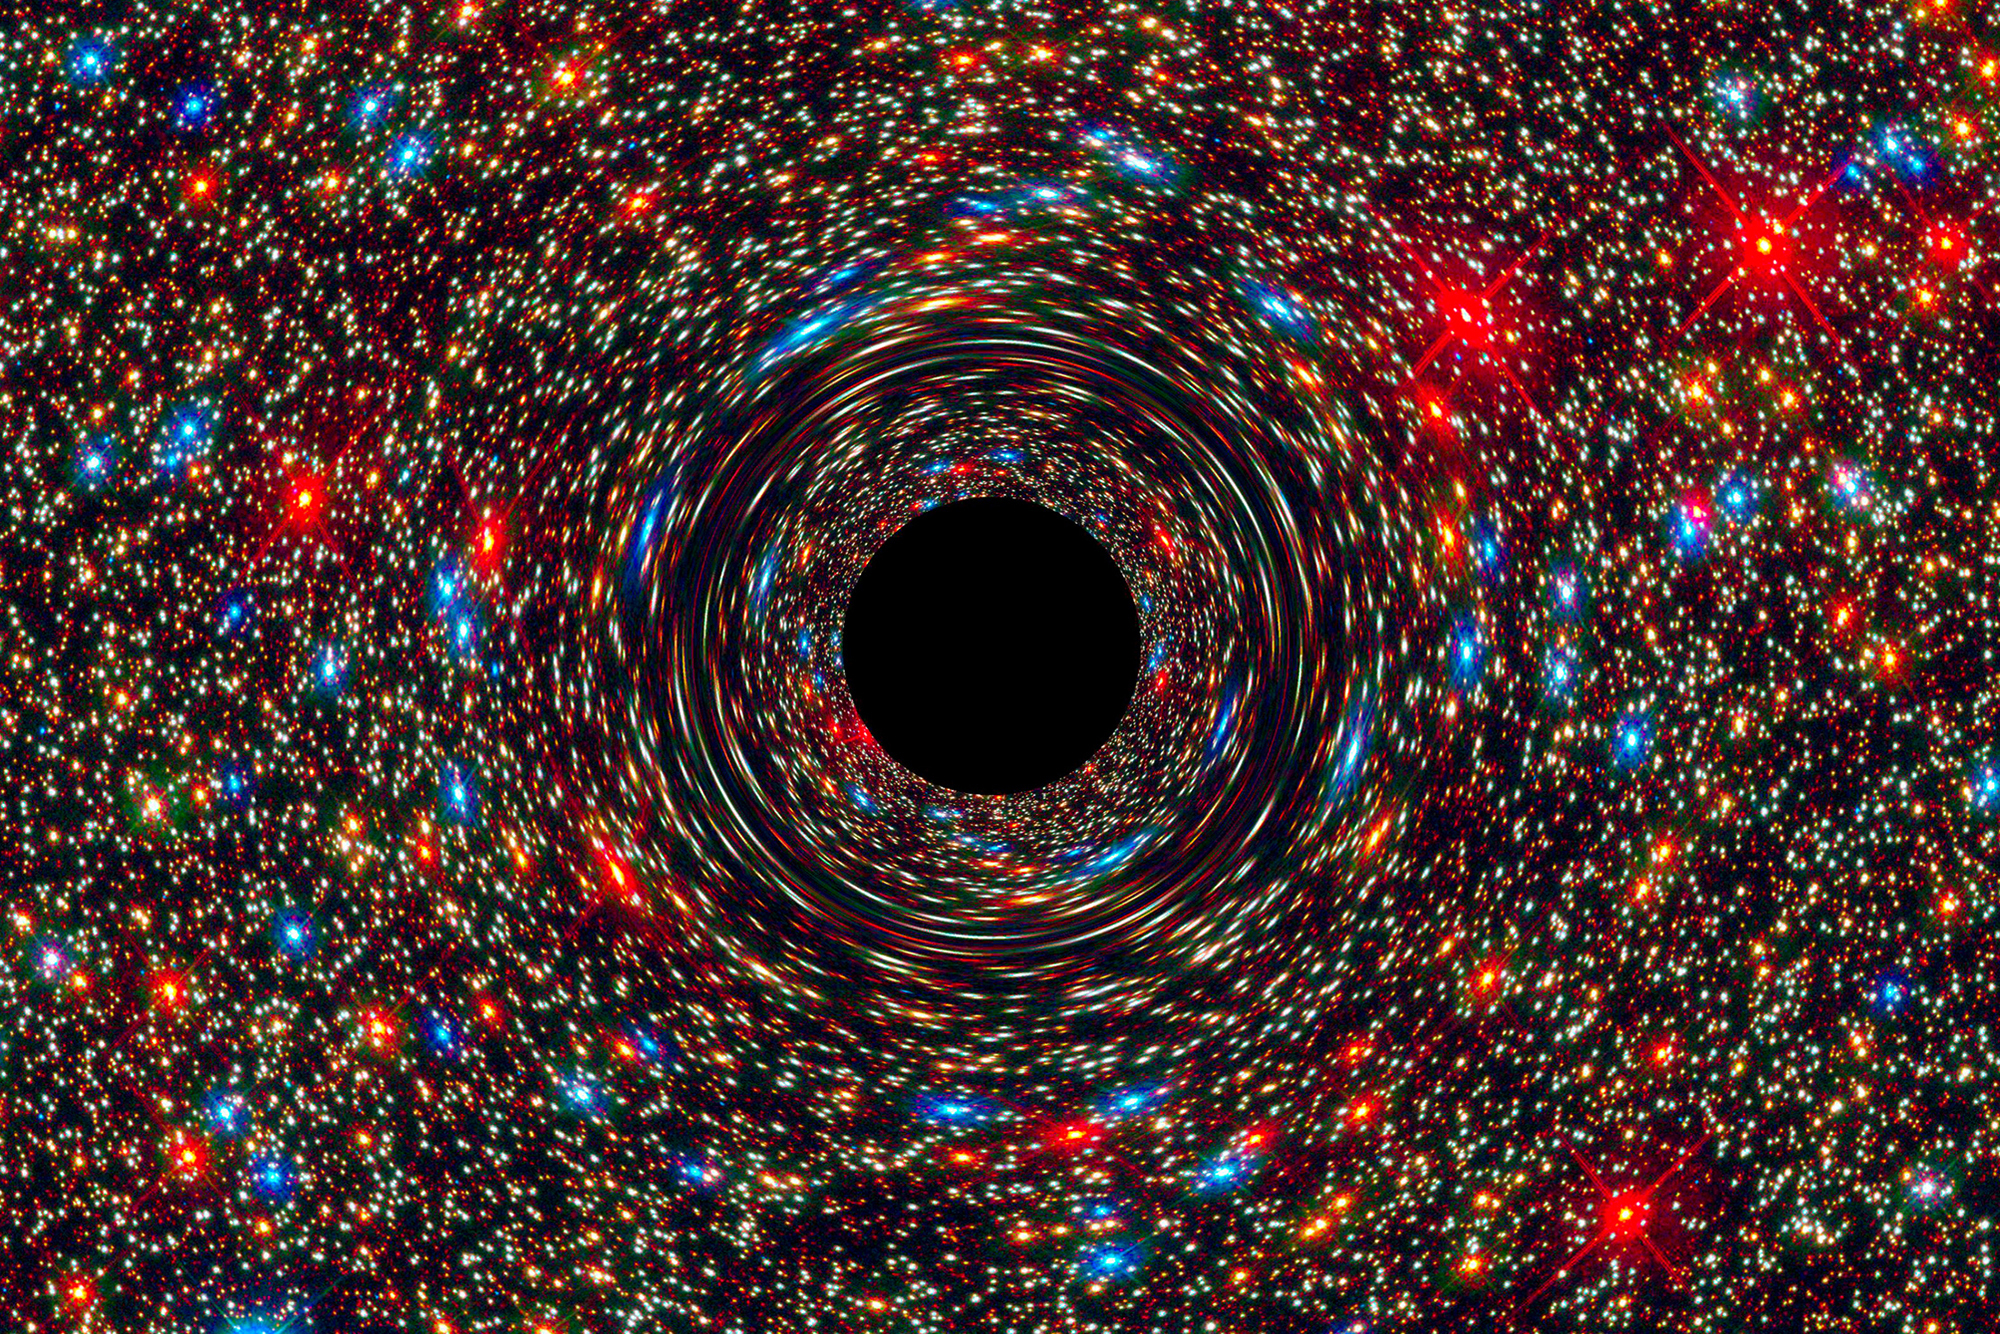 Supermassive Black Hole A*: News: Rapidograph pens and the Crown Jewels